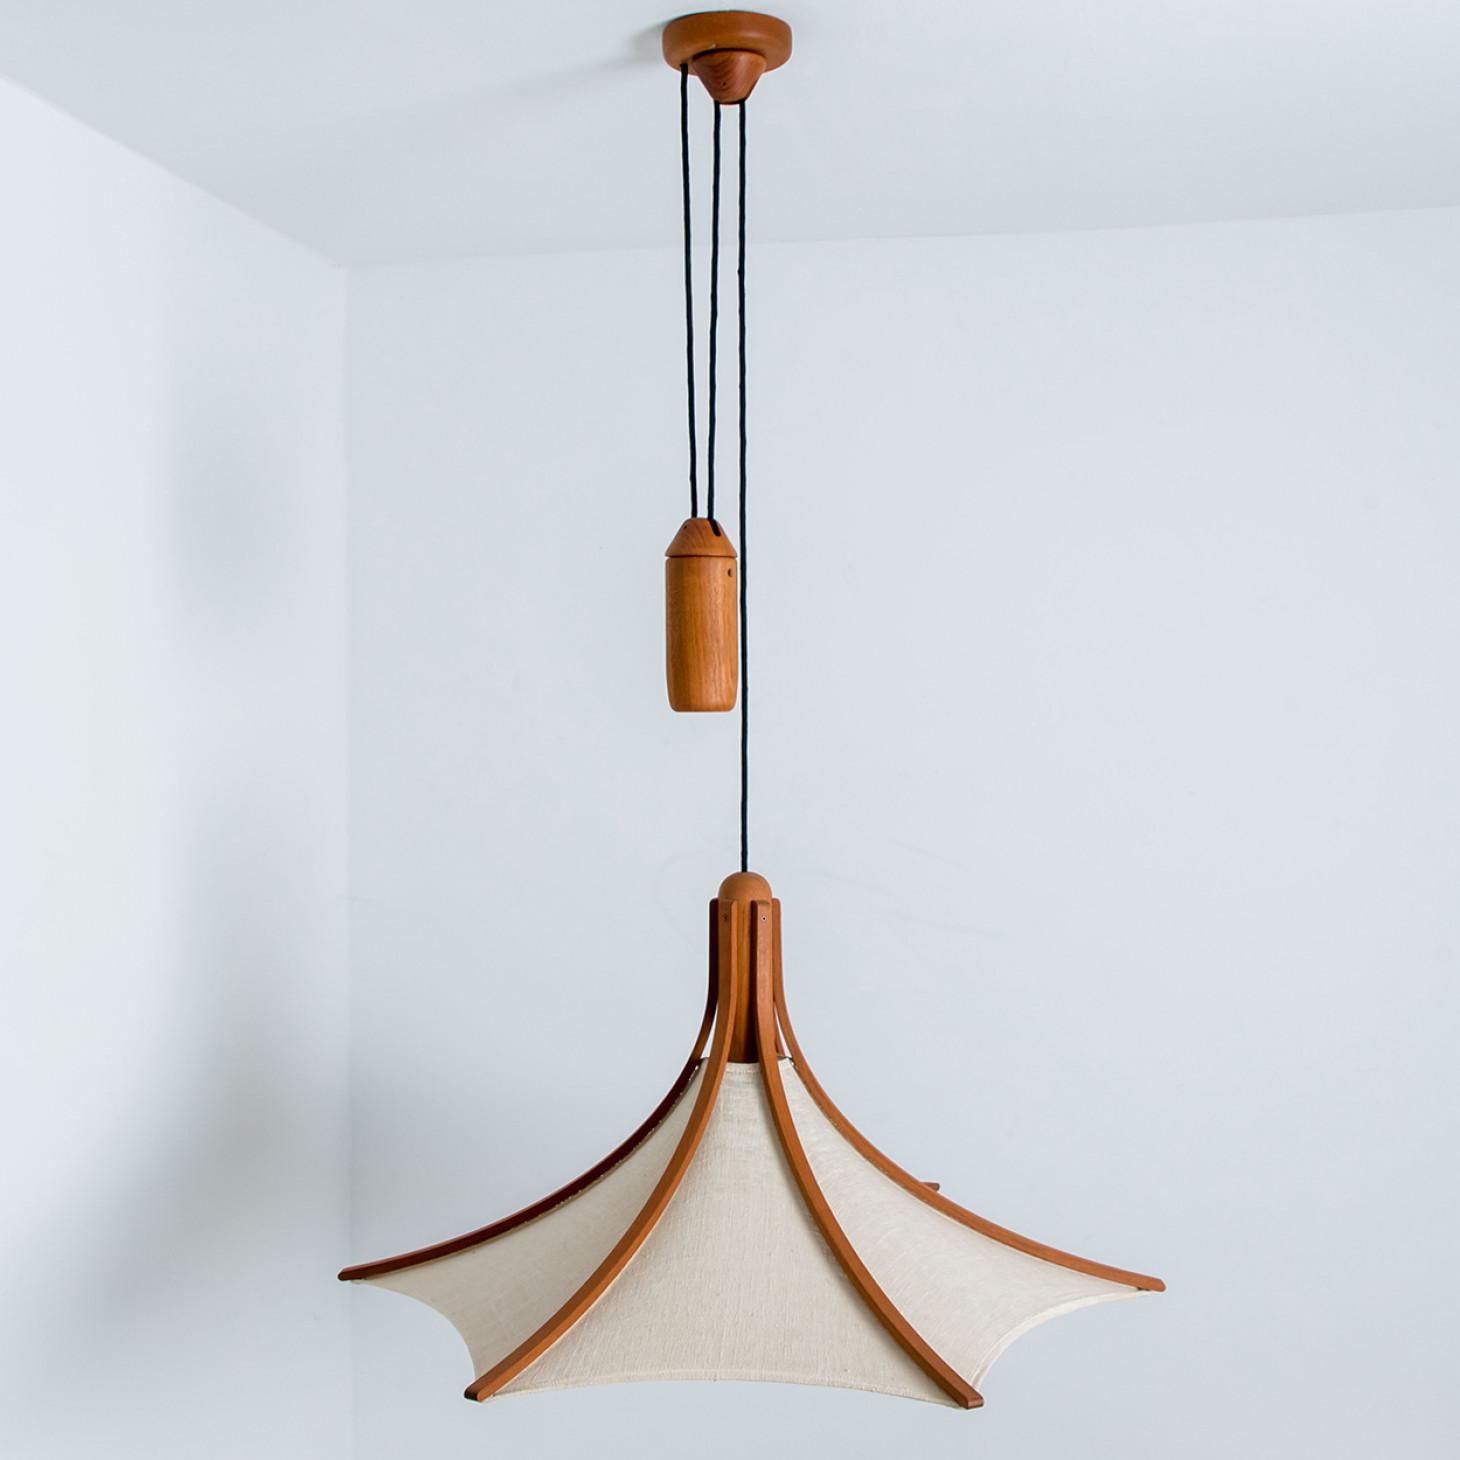 1 of the 2 Wooden Pendant Light with Textile Shade by Domus Germany, 1970s For Sale 11